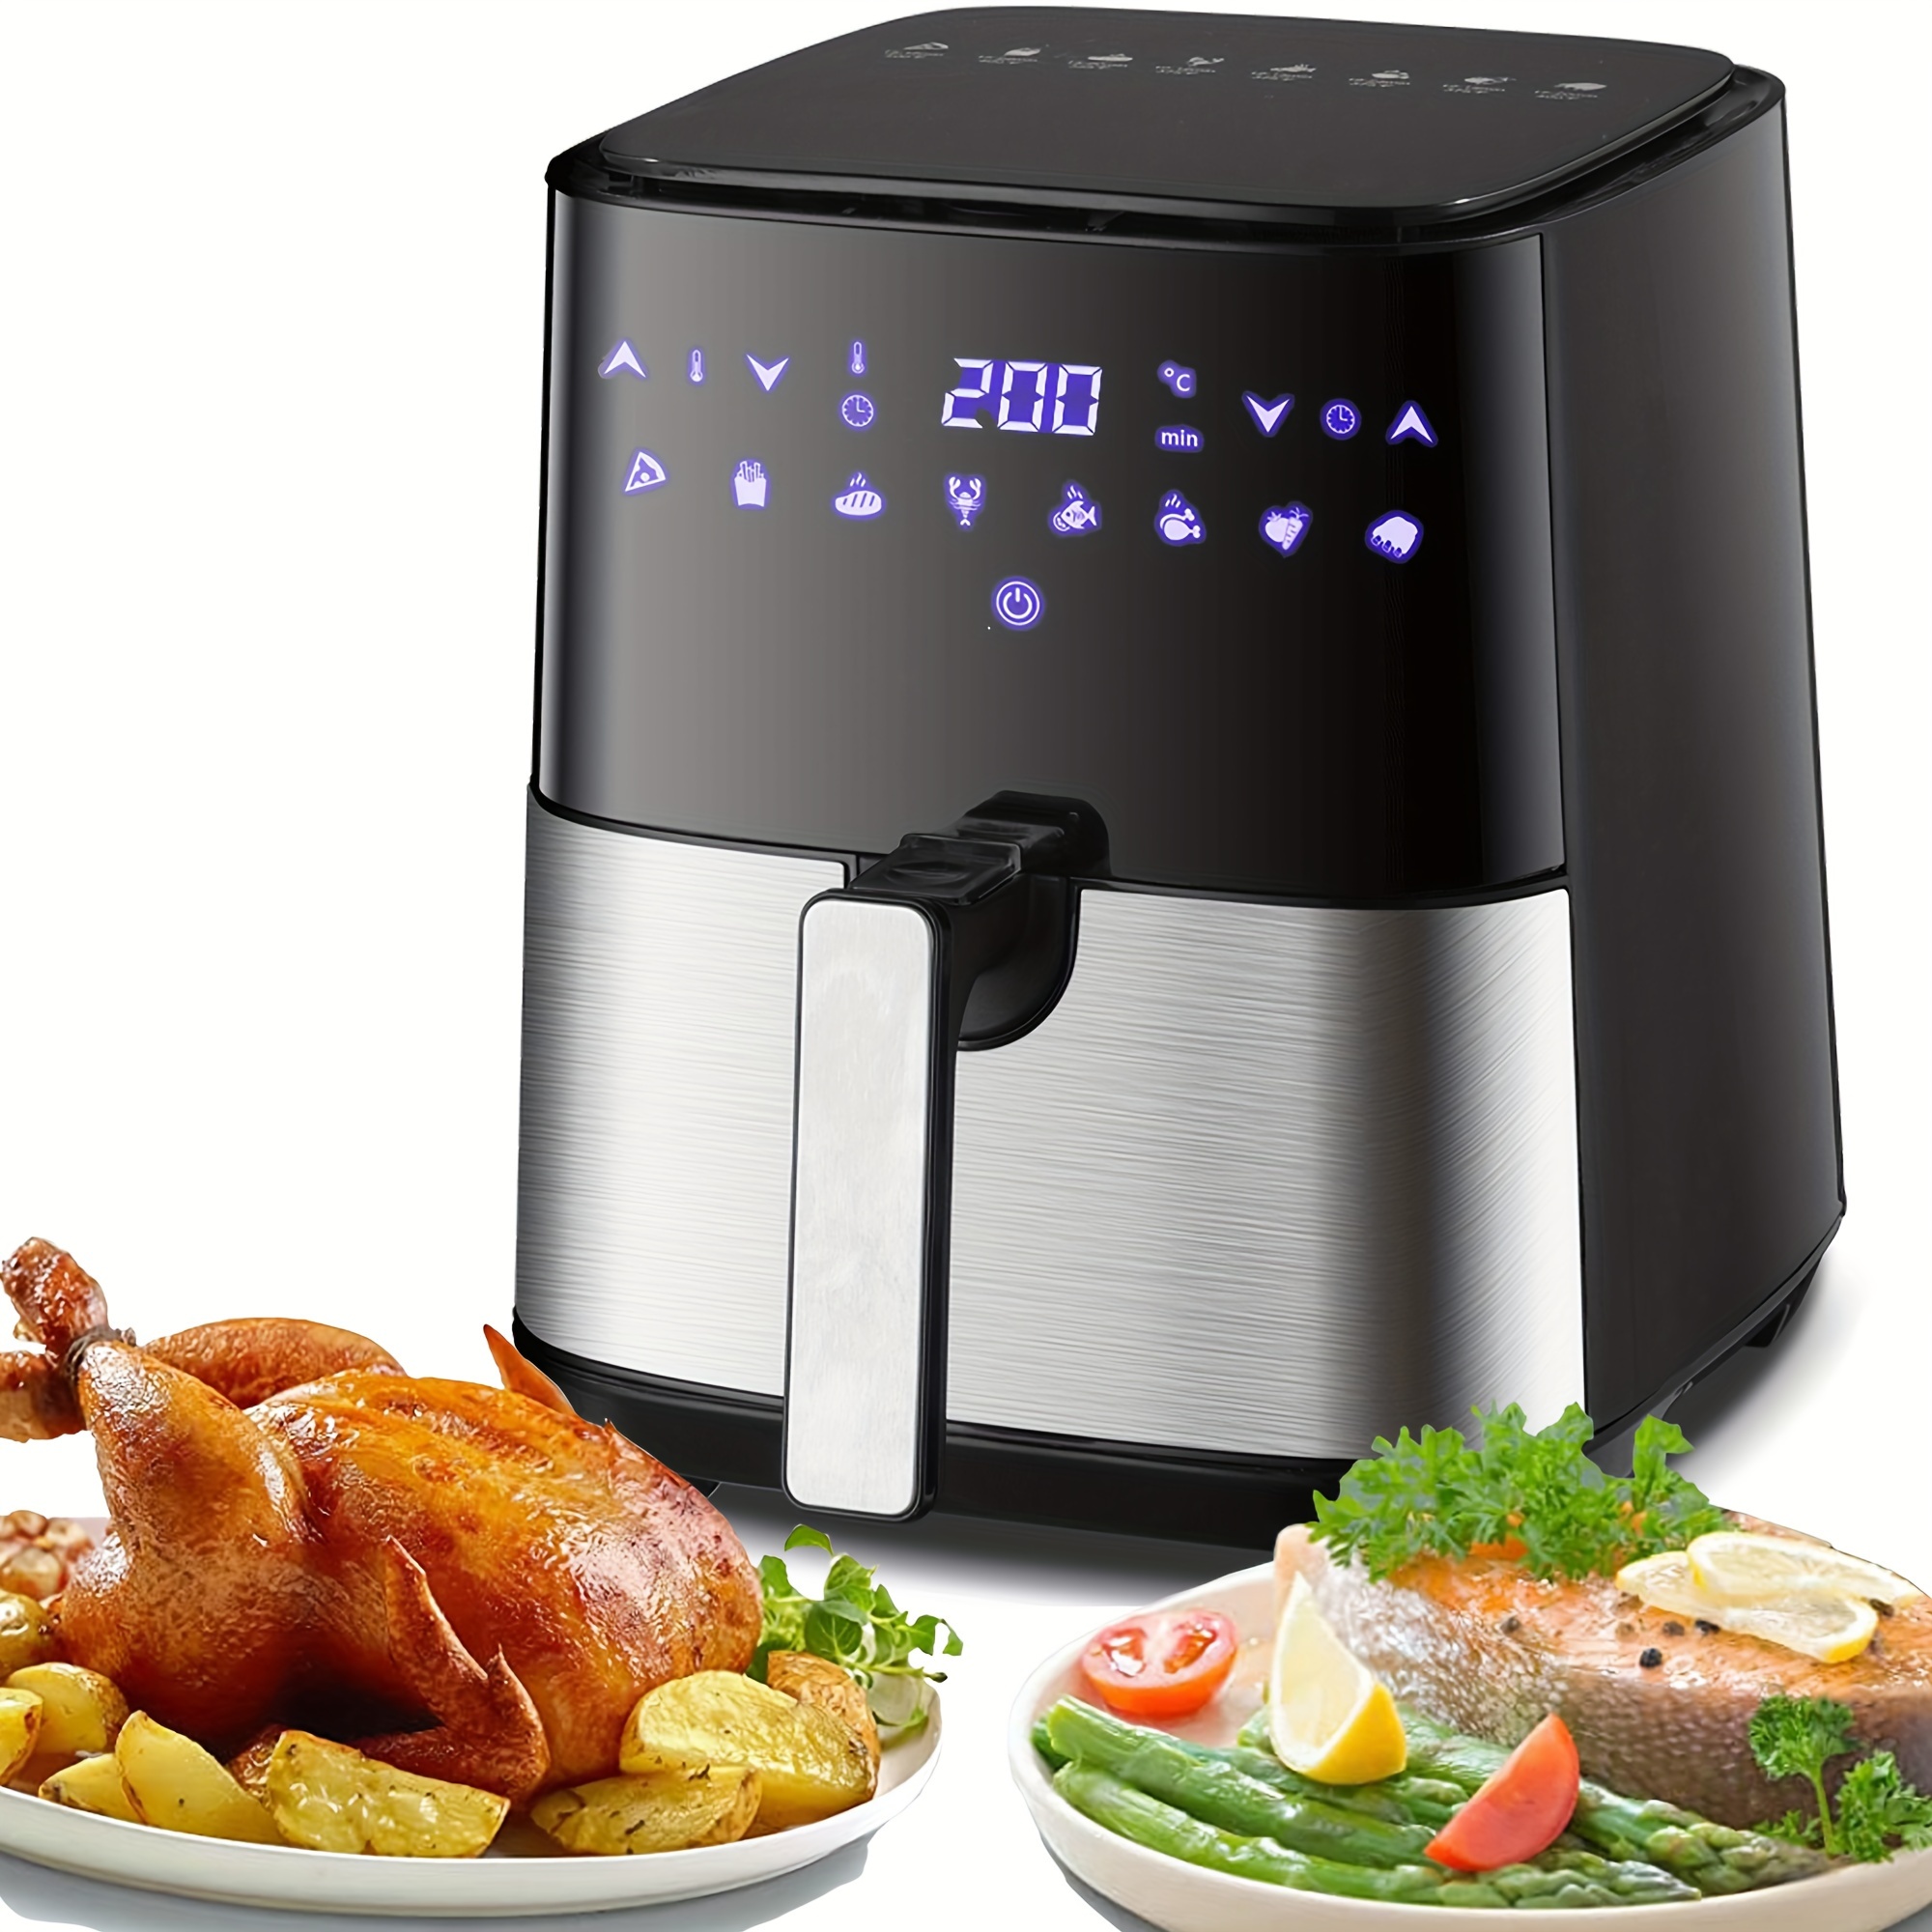 1pc, KitCook Large Air Fryer, 1500W 120V 6.8QT Stainless Steel Air Fryers  Oven, Nonstick Basket, LED Touch Screen, 8 Presets Menus, Dishwasher Safe Fo